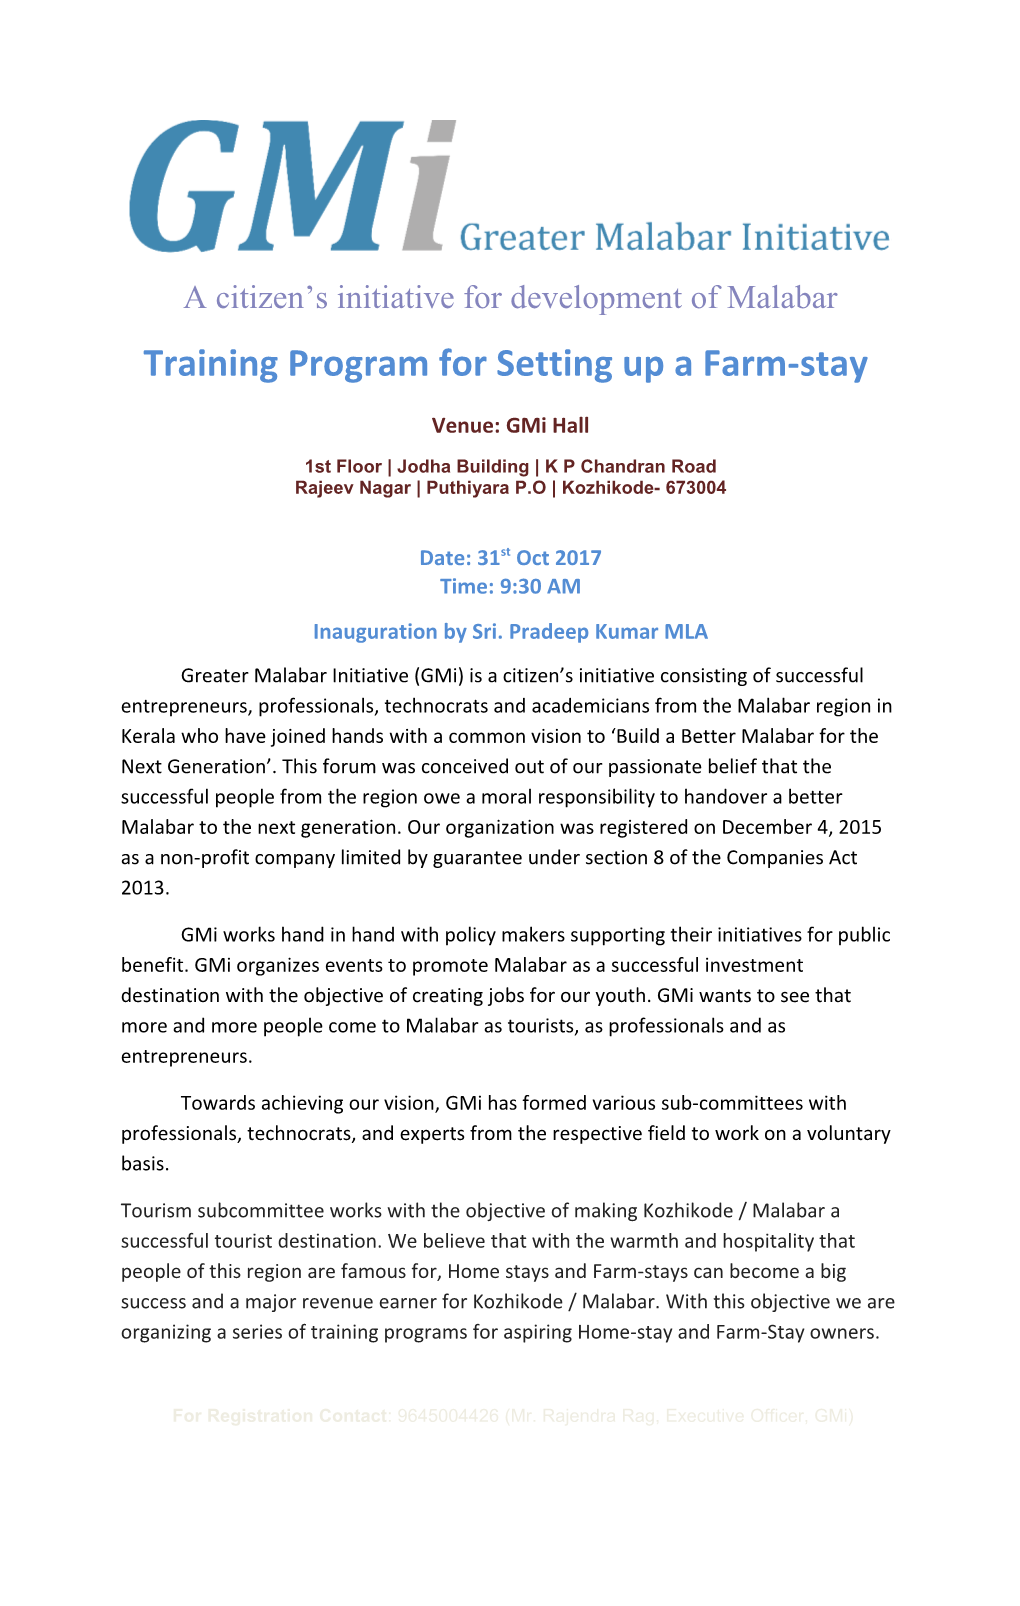 Training Program for Setting up a Farm-Stay